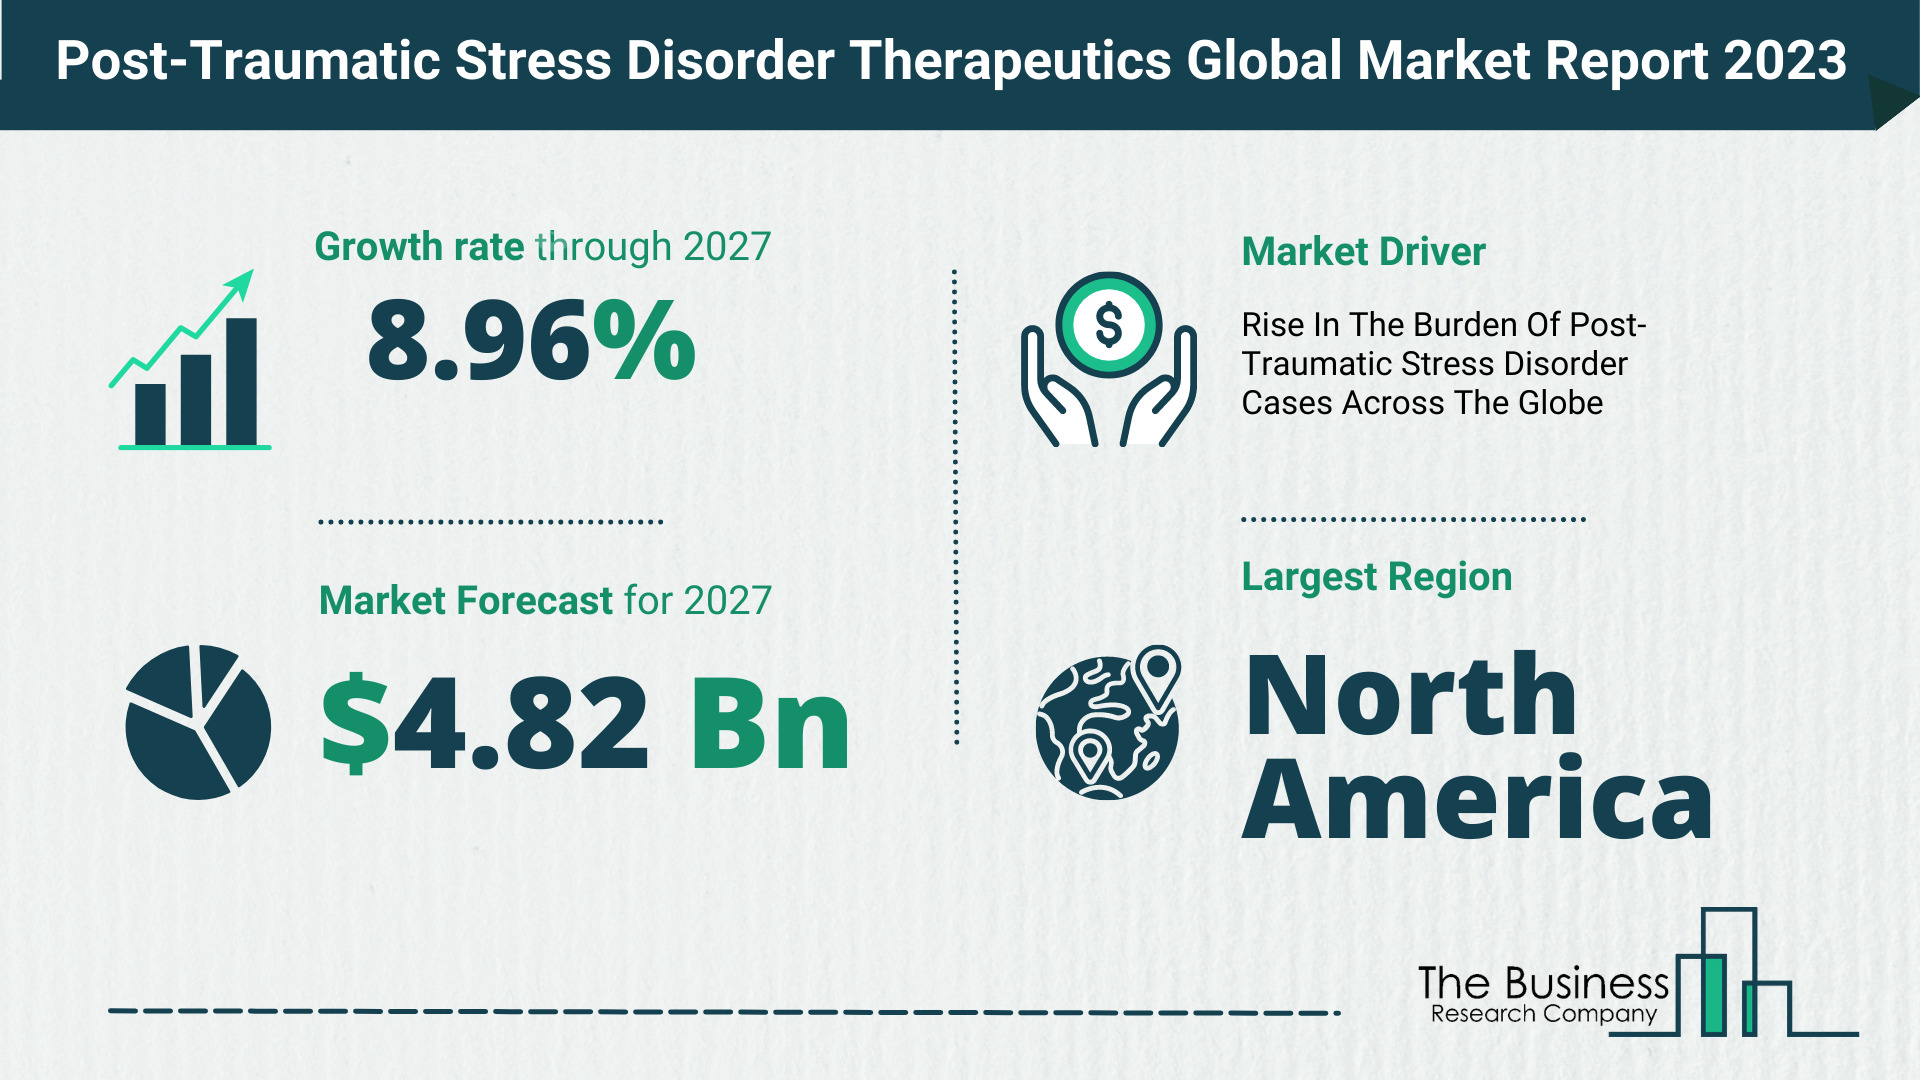 Global Post-Traumatic Stress Disorder Therapeutics Market Opportunities And Strategies 2023